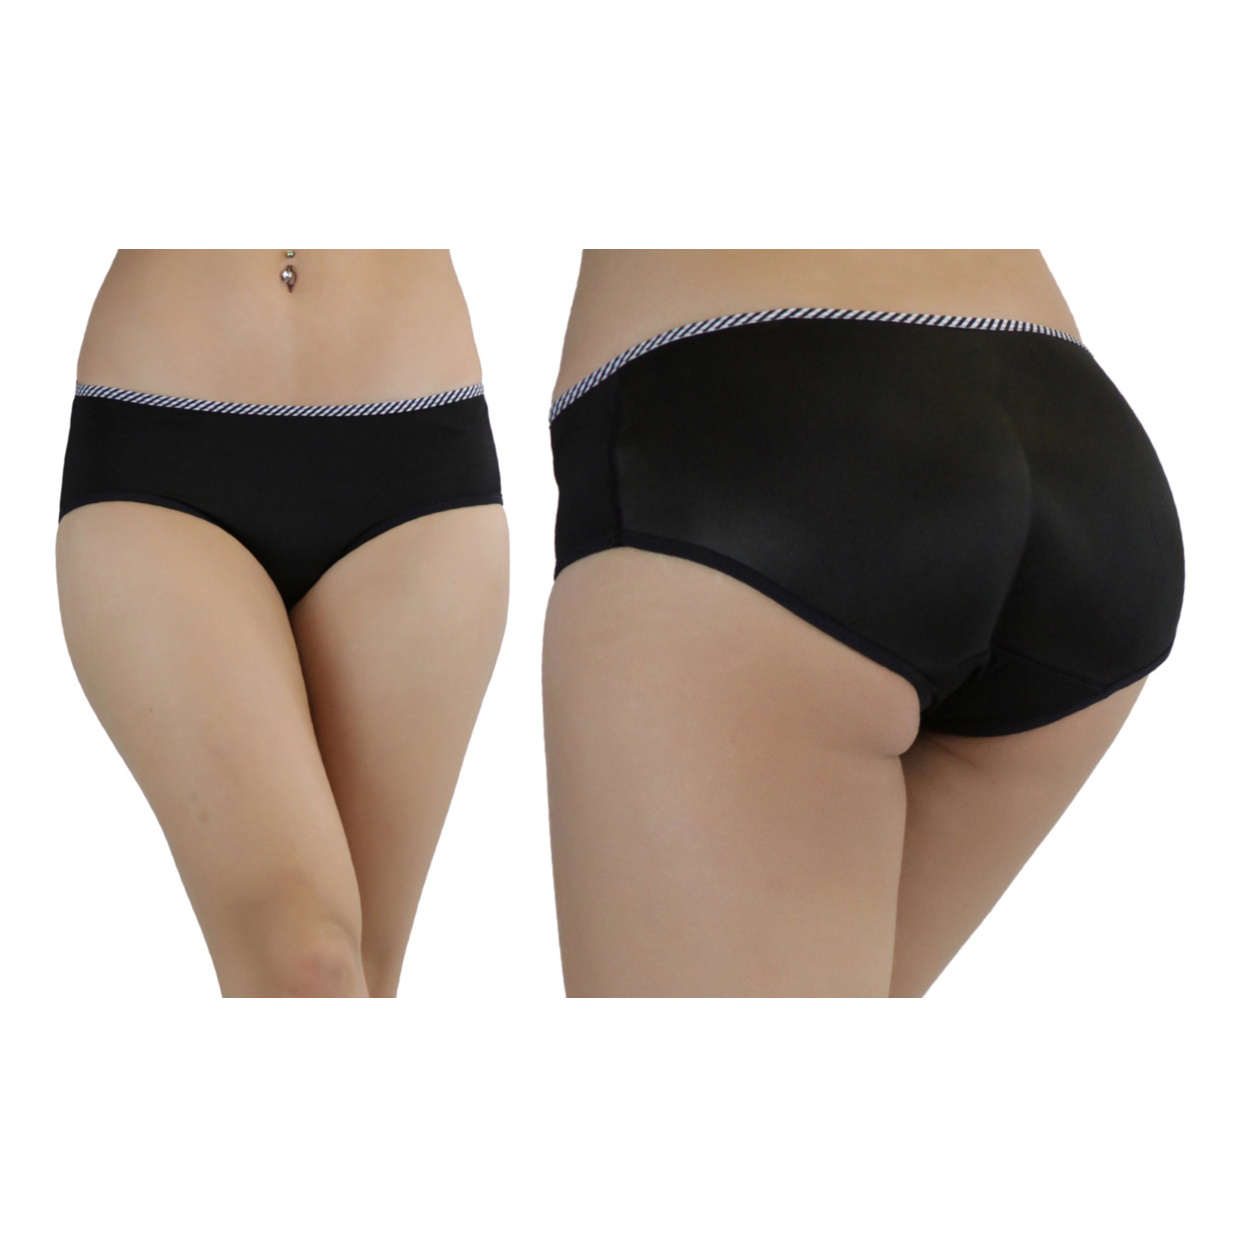 Women's Instant Booty Boosters Padded Panty - Black, L